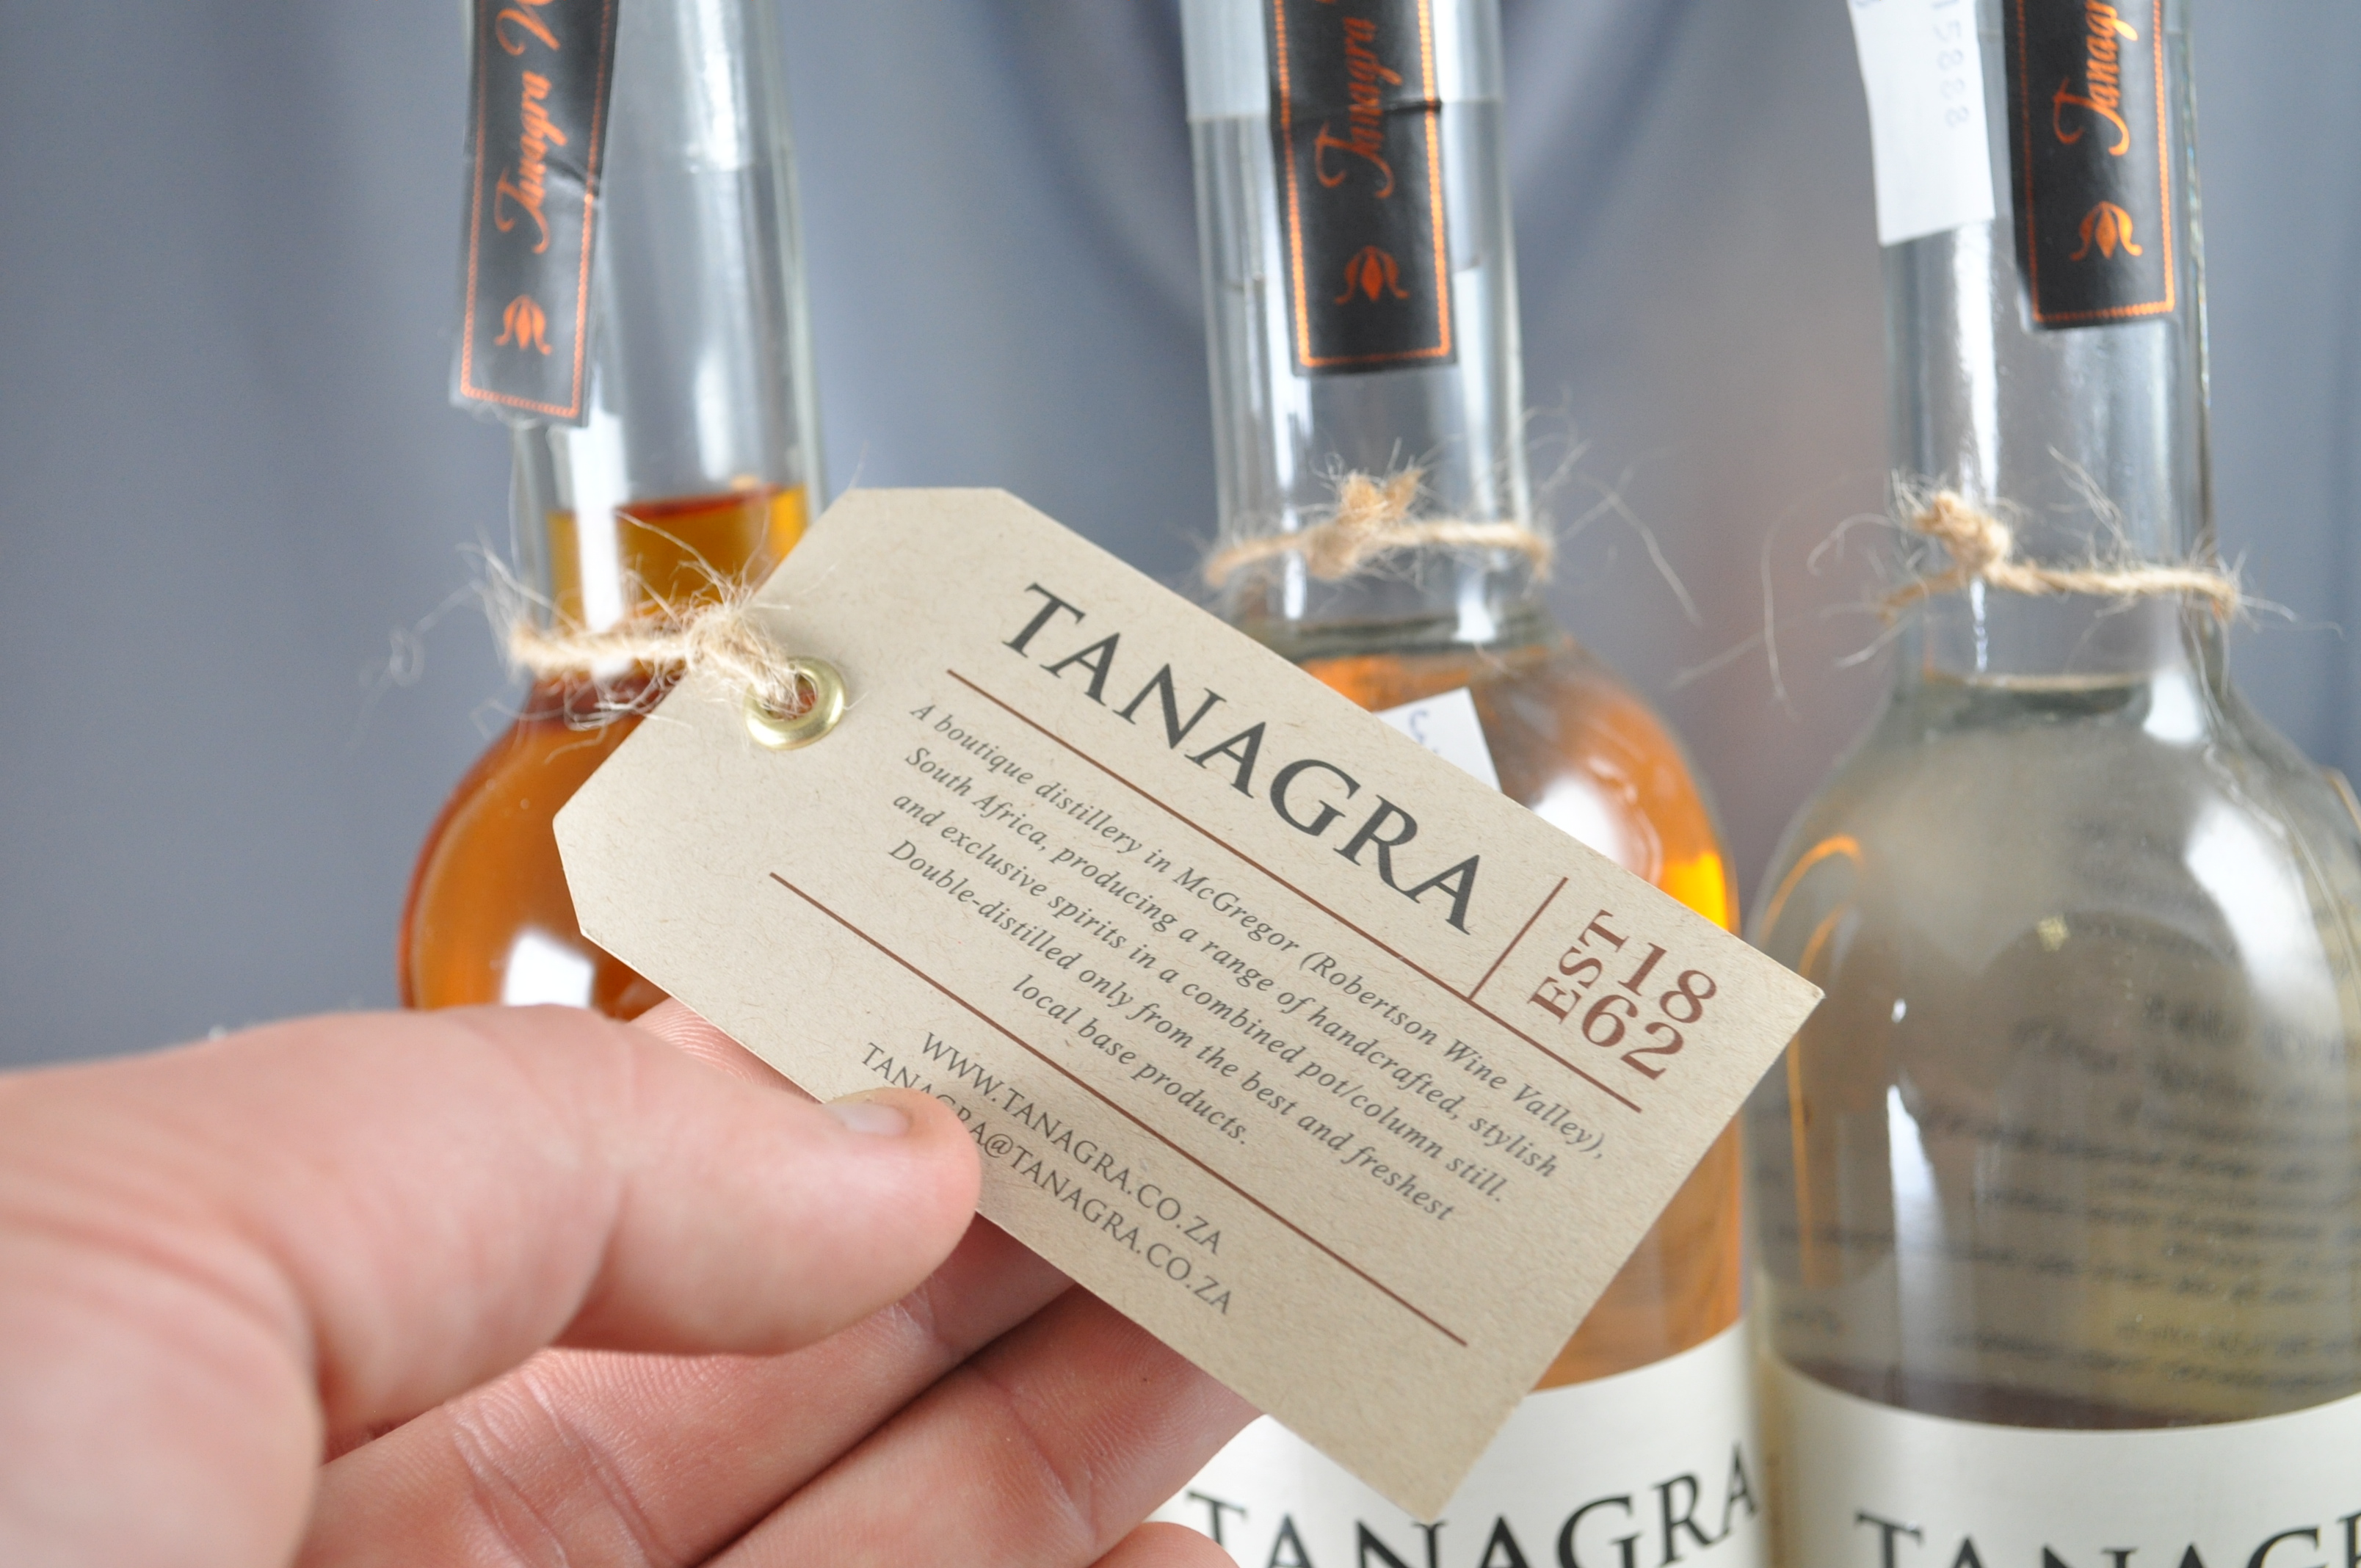 A selection of Tanagra liqueur. - Image 2 of 4